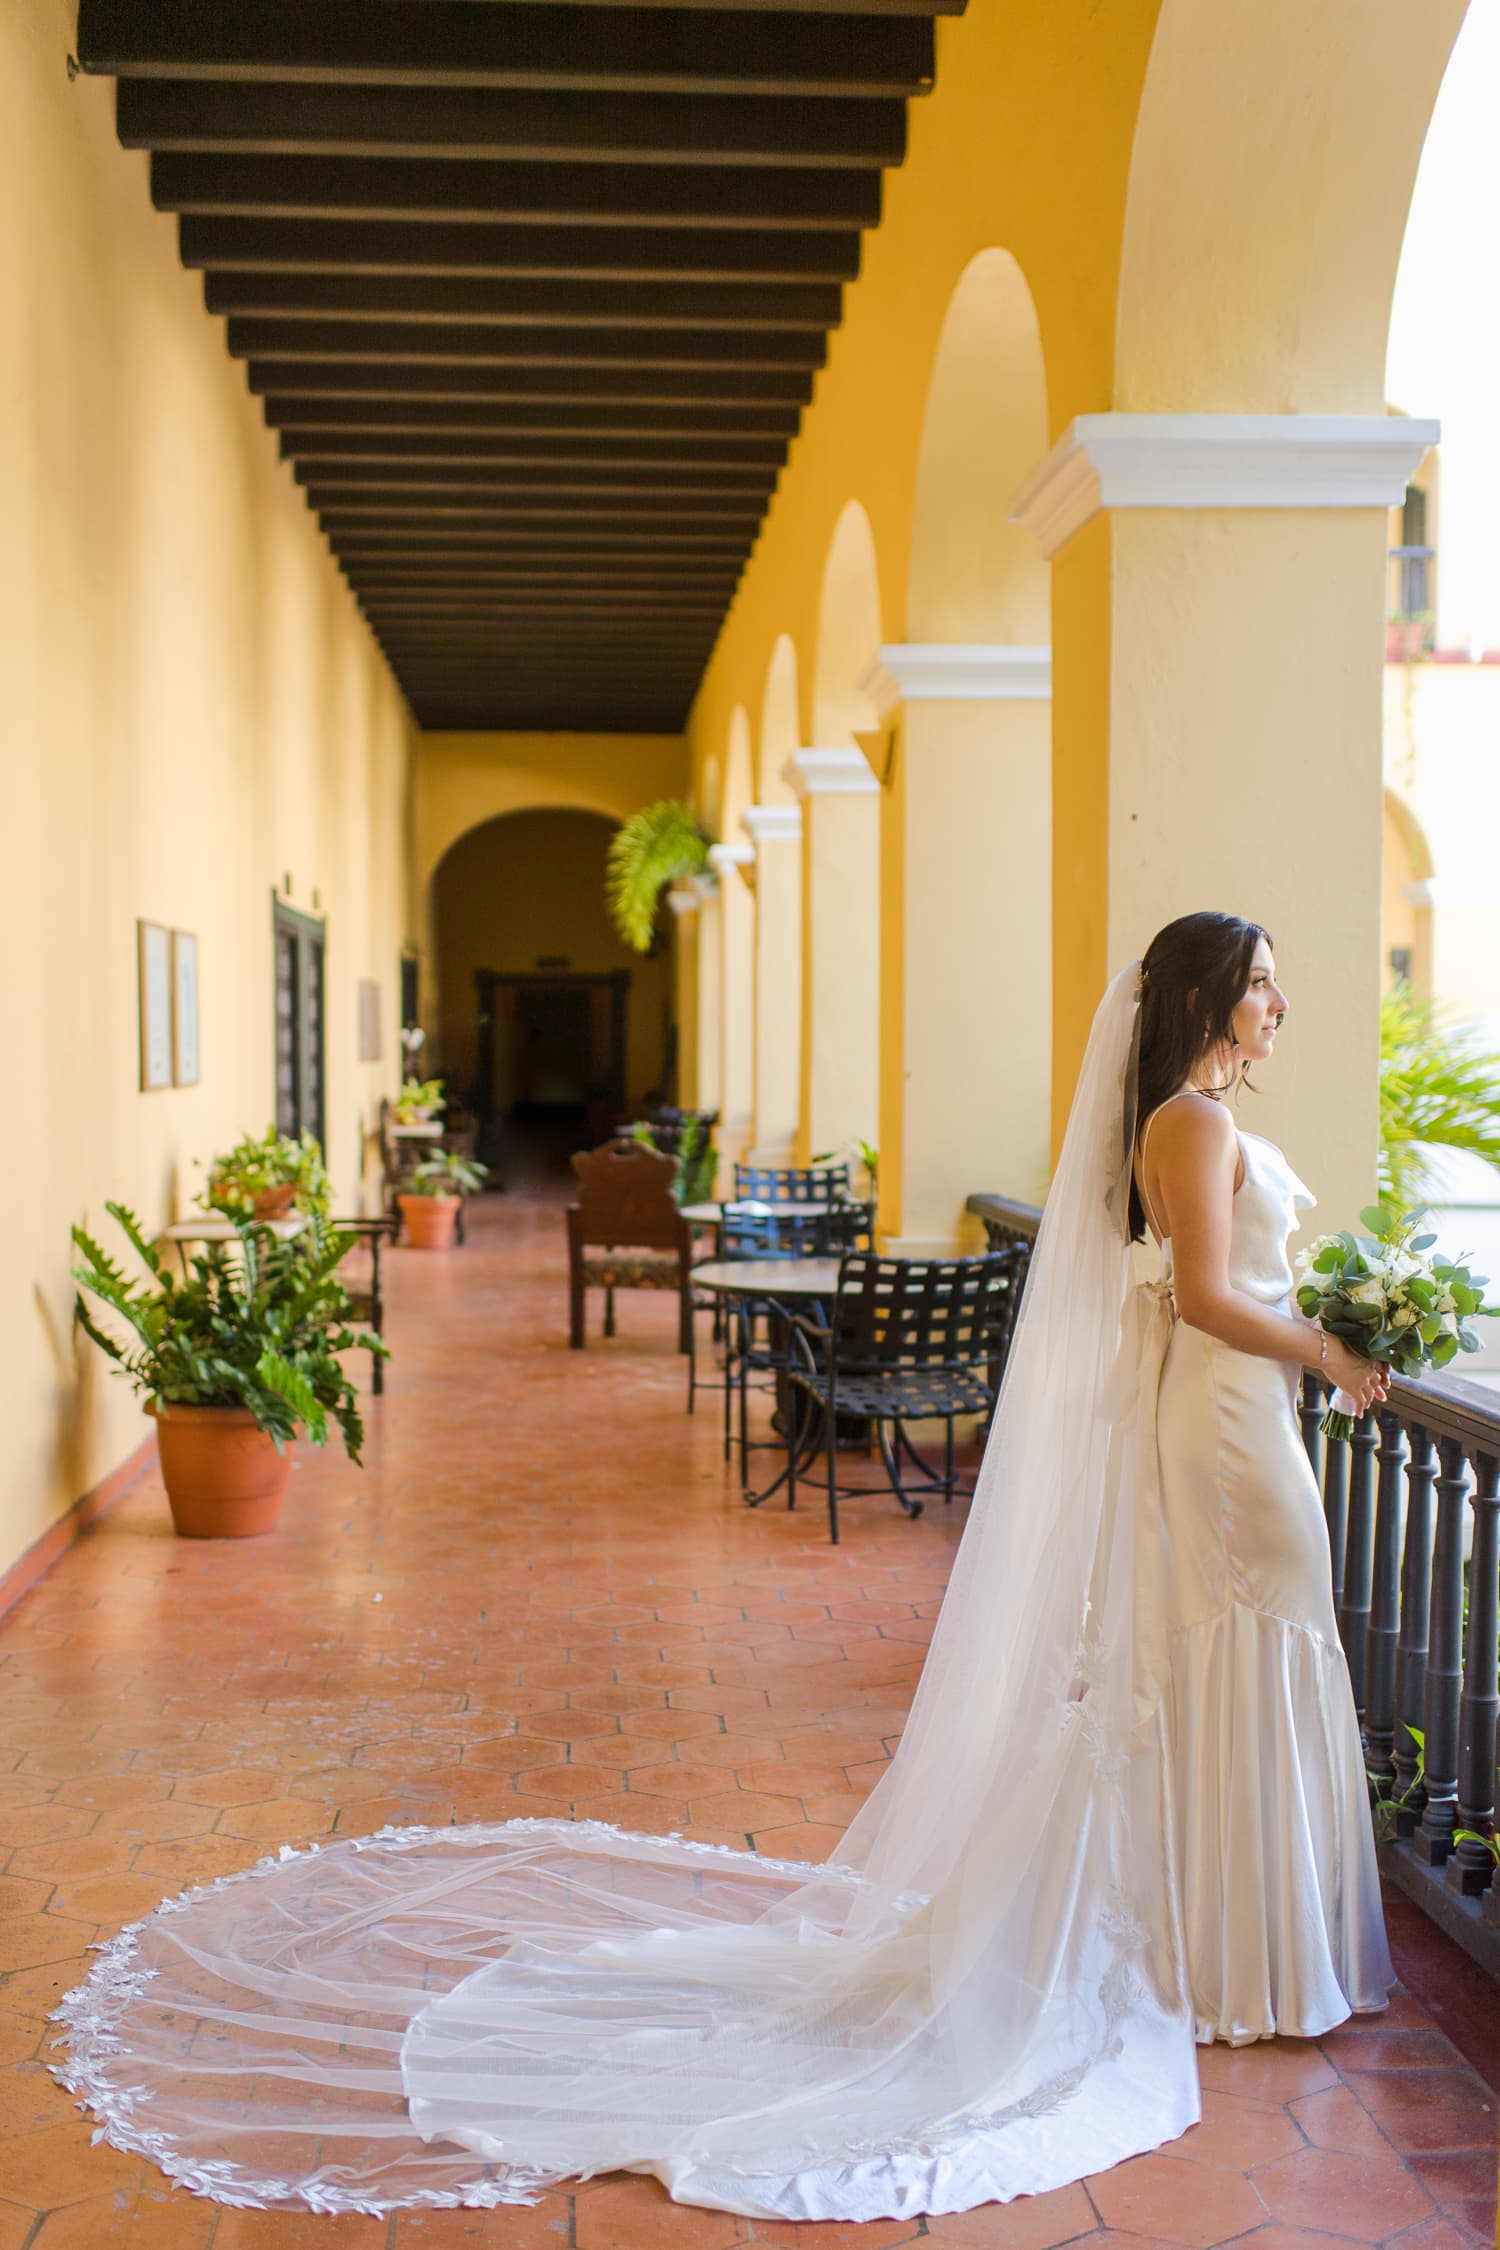 a destination wedding with a timeless, classic flair, photographed in Hotel El Convento in Old San Juan Puerto Rico